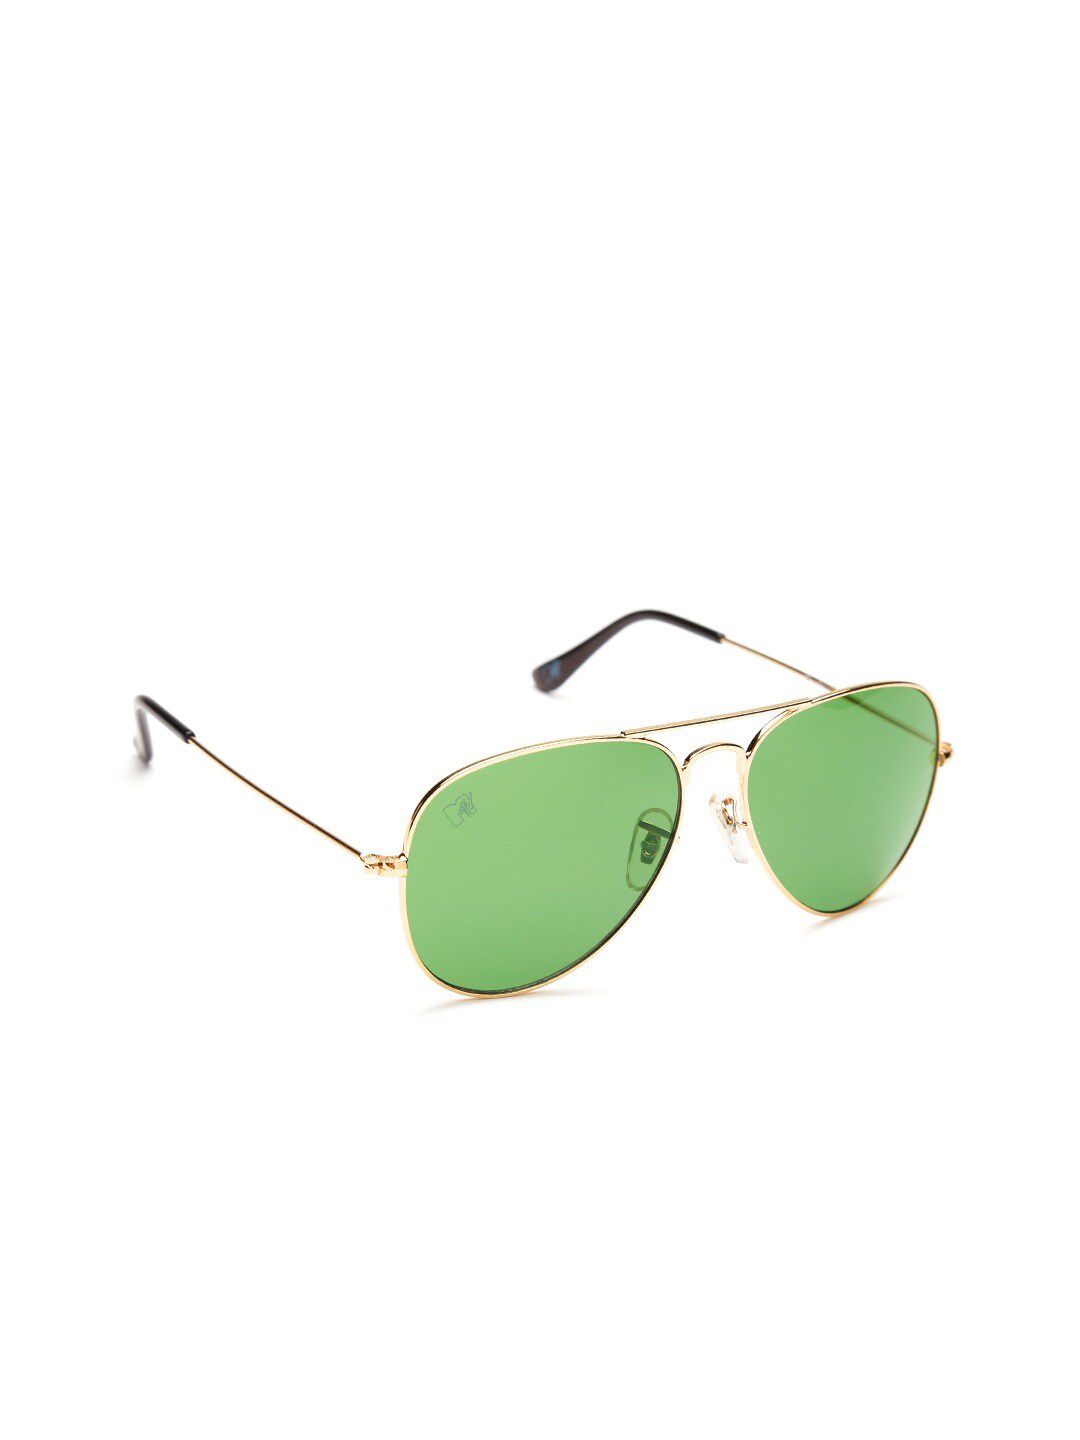 MTV Unisex Green Lens & Gold-Toned Aviator Sunglasses with UV Protected Lens Price in India